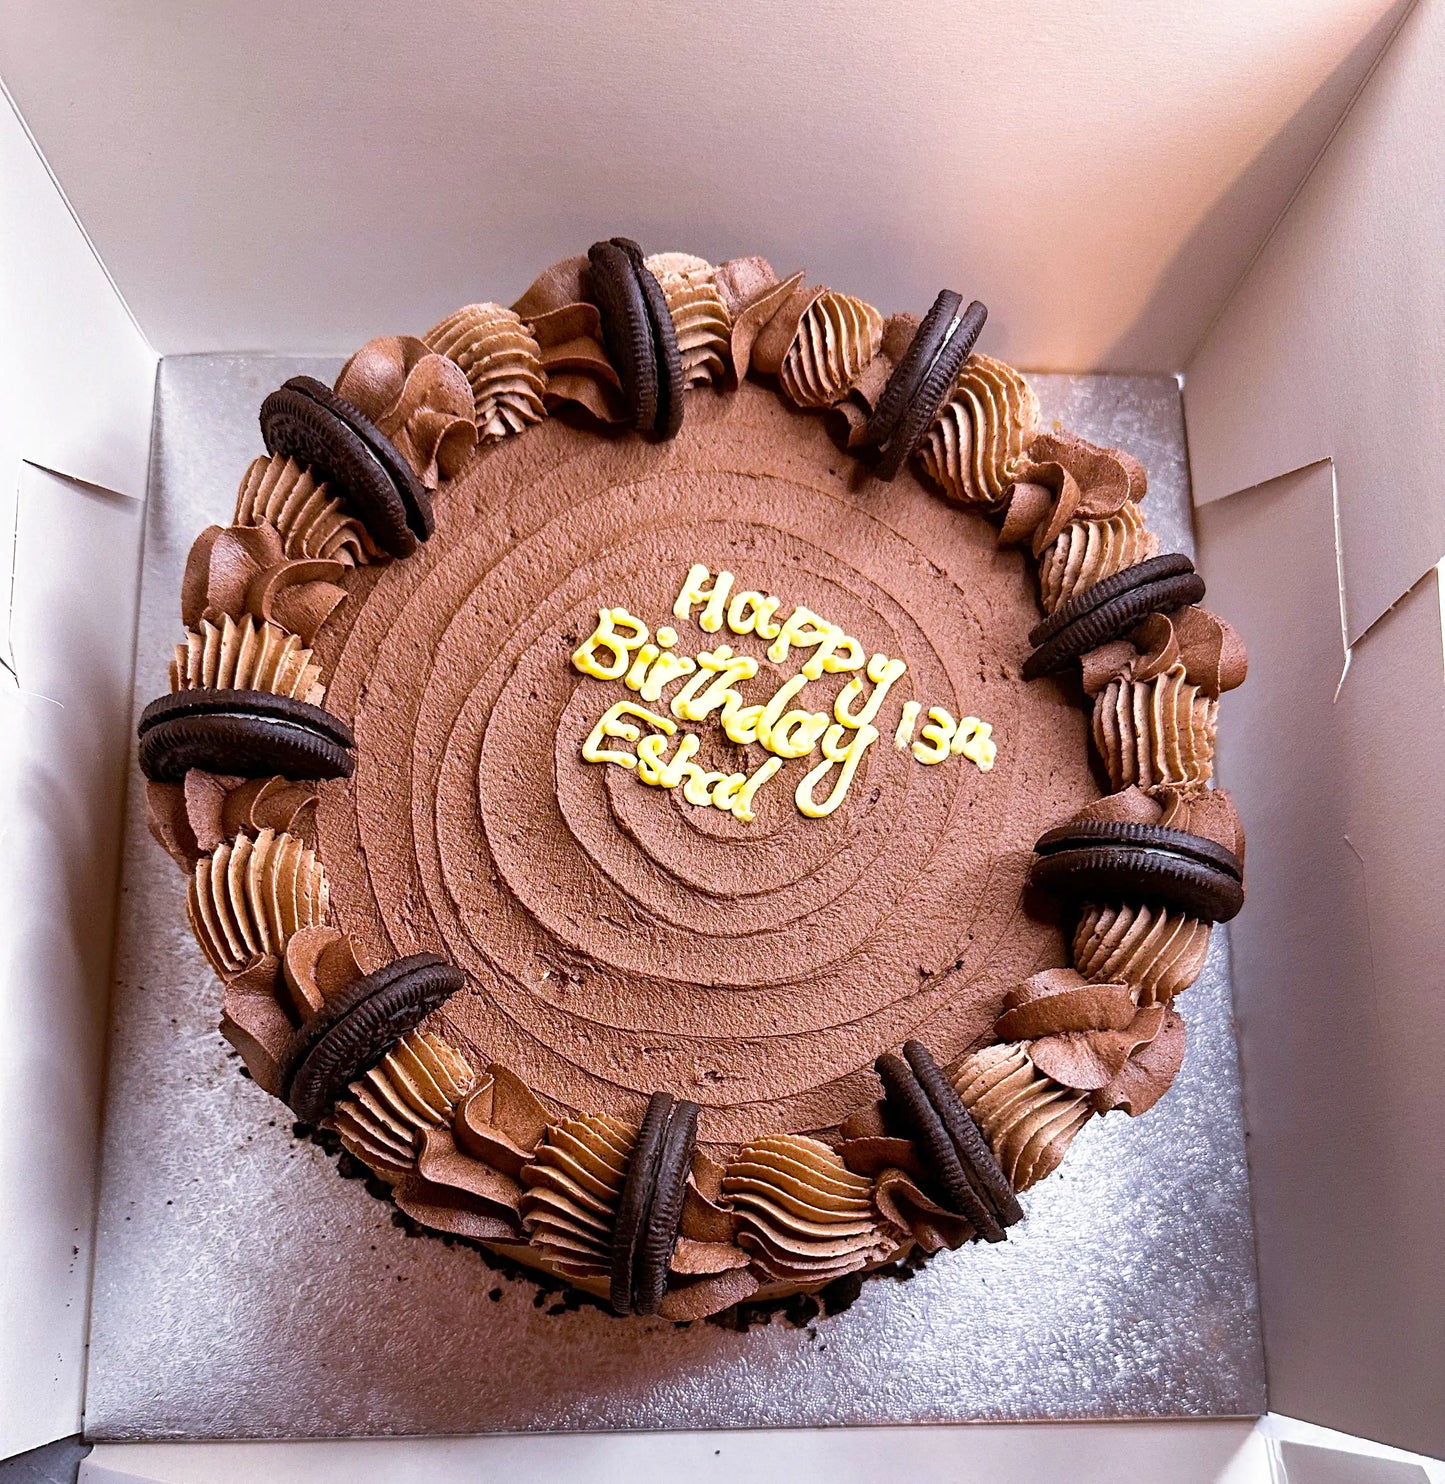 Birthday Cake - Premium Cakes & Dessert Bars from Cake Trays - Just £29.99! Shop now at Cake Trays